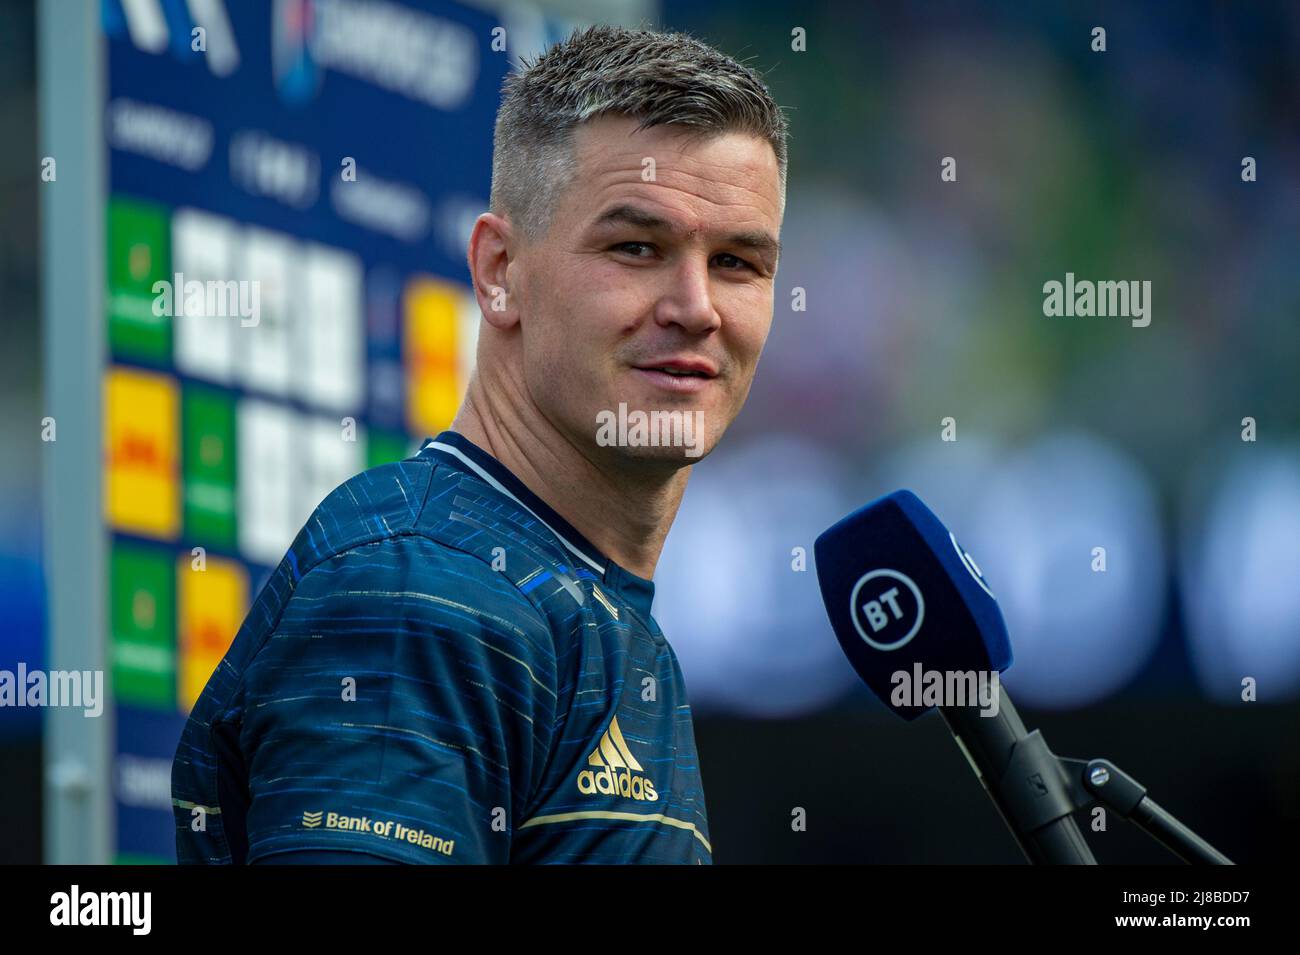 Johnny Sexton of Leinster during the TV interview after the Heineken Champions Cup Semi Final match between Leinster Rugby and Stade Toulousain at Aviva Stadium in Dublin, Ireland on May 14, 2022 (